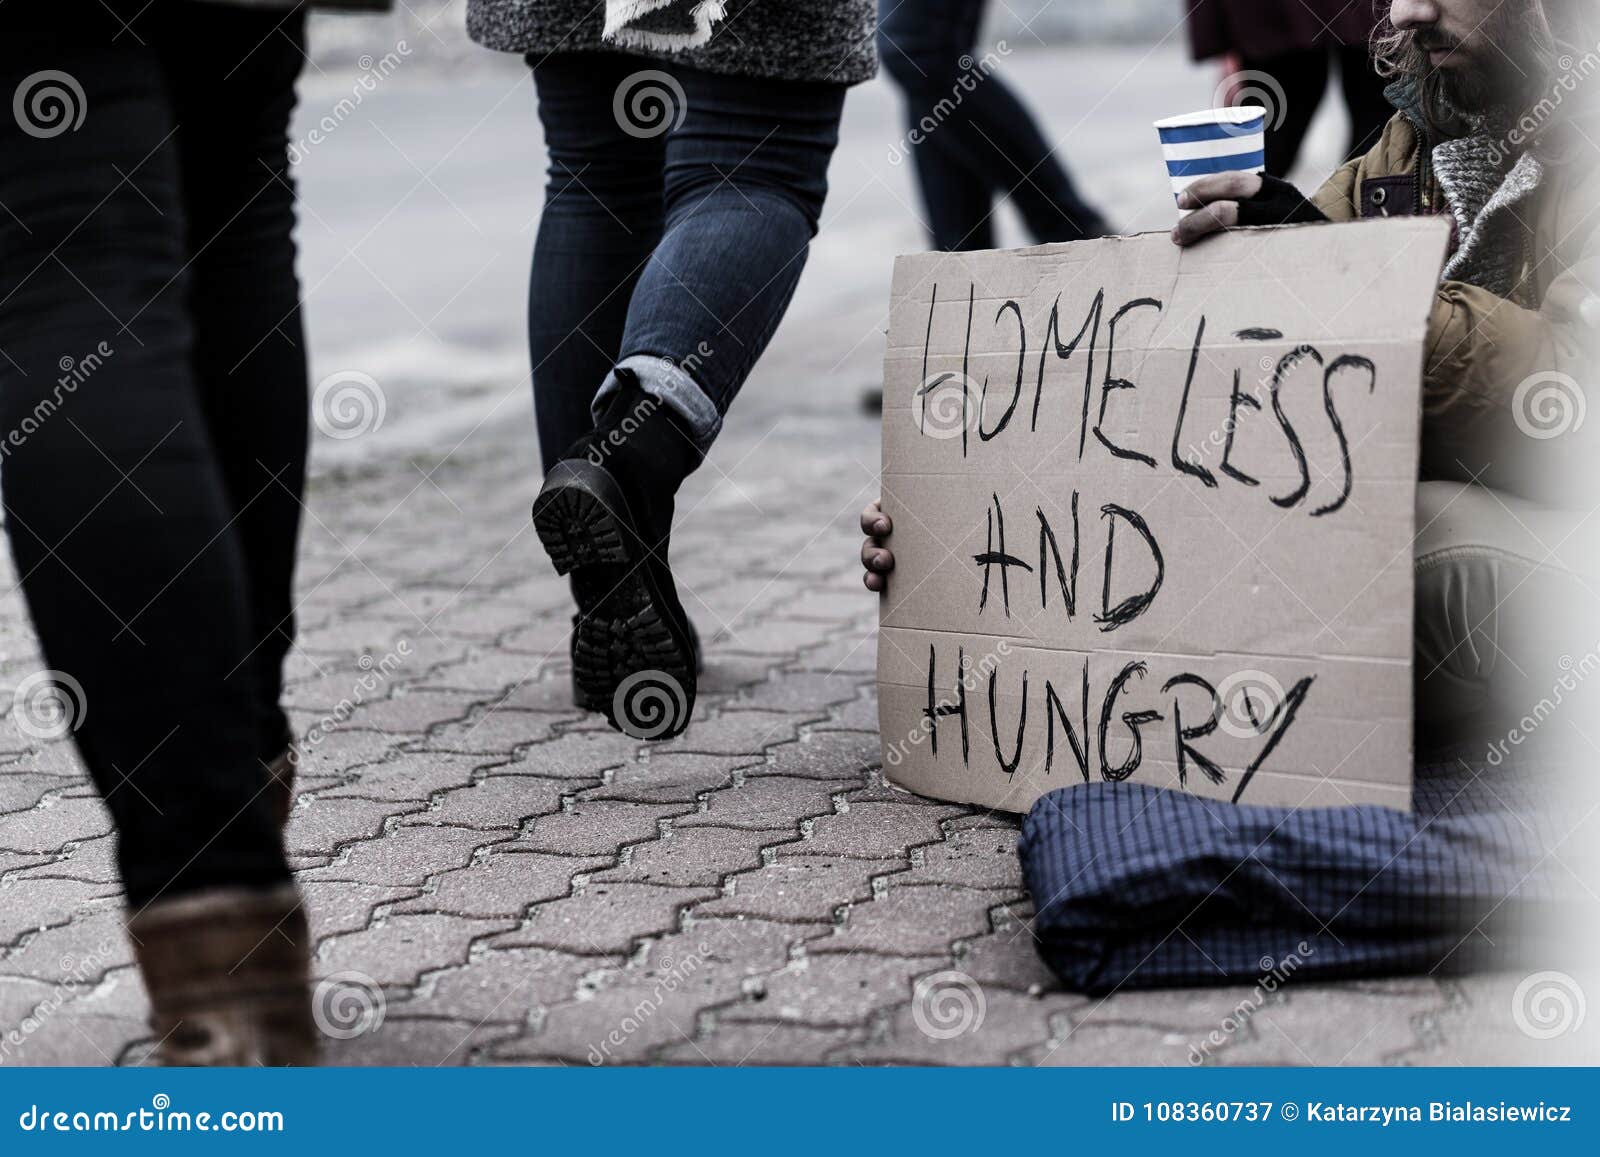 homeless and hungry pauper